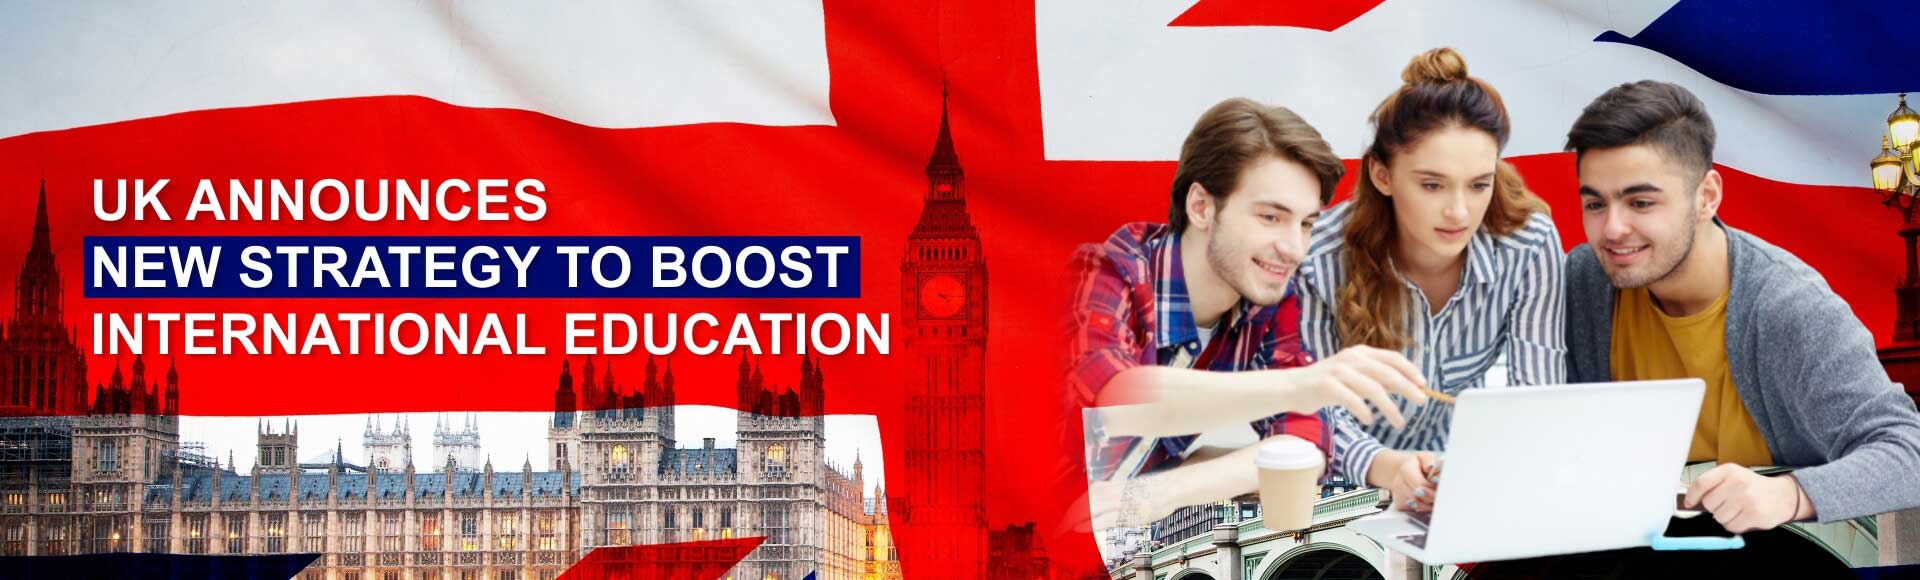 UK announces new strategy to boost international education